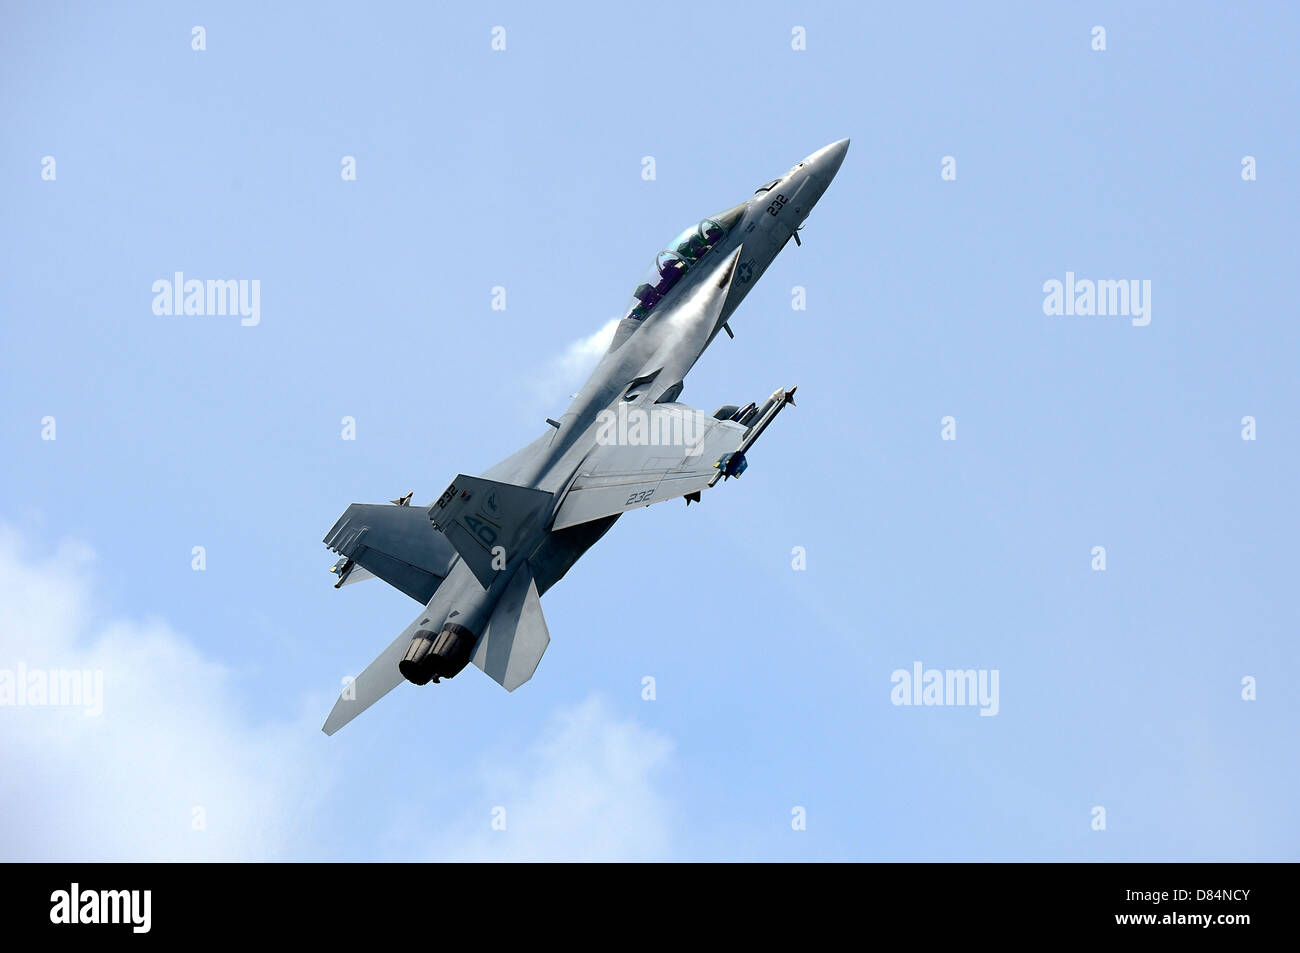 An F/A-18 Super Hornet of the U.S. Navy in flight over Langkawi Airport, Malaysia. Stock Photo